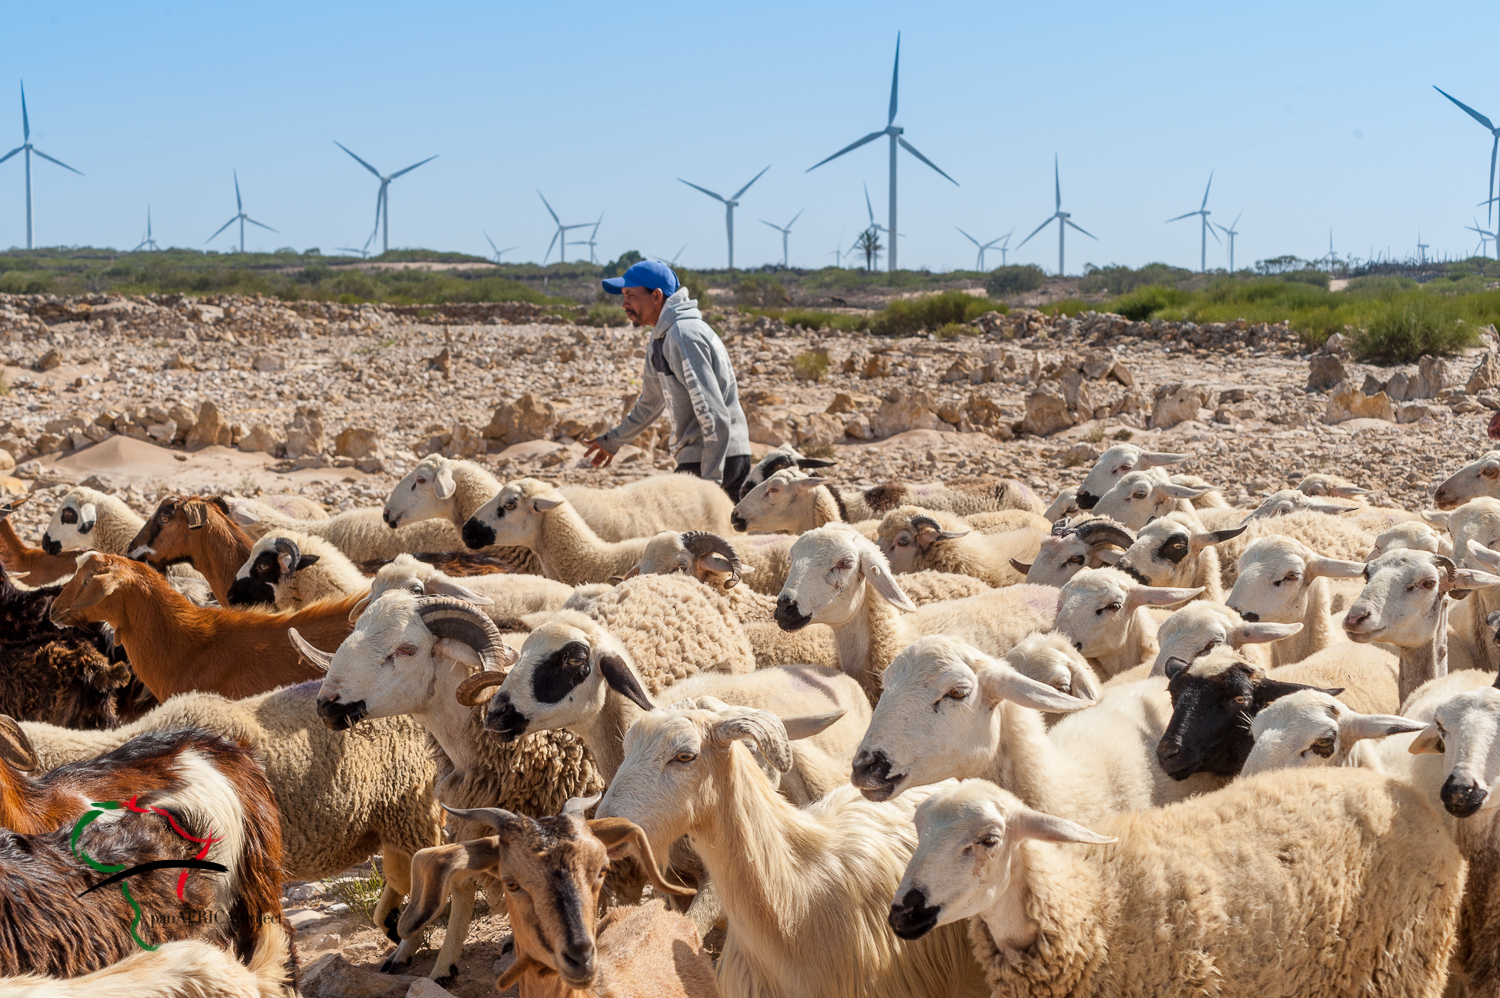 Man herding sheep in front of a wind farm